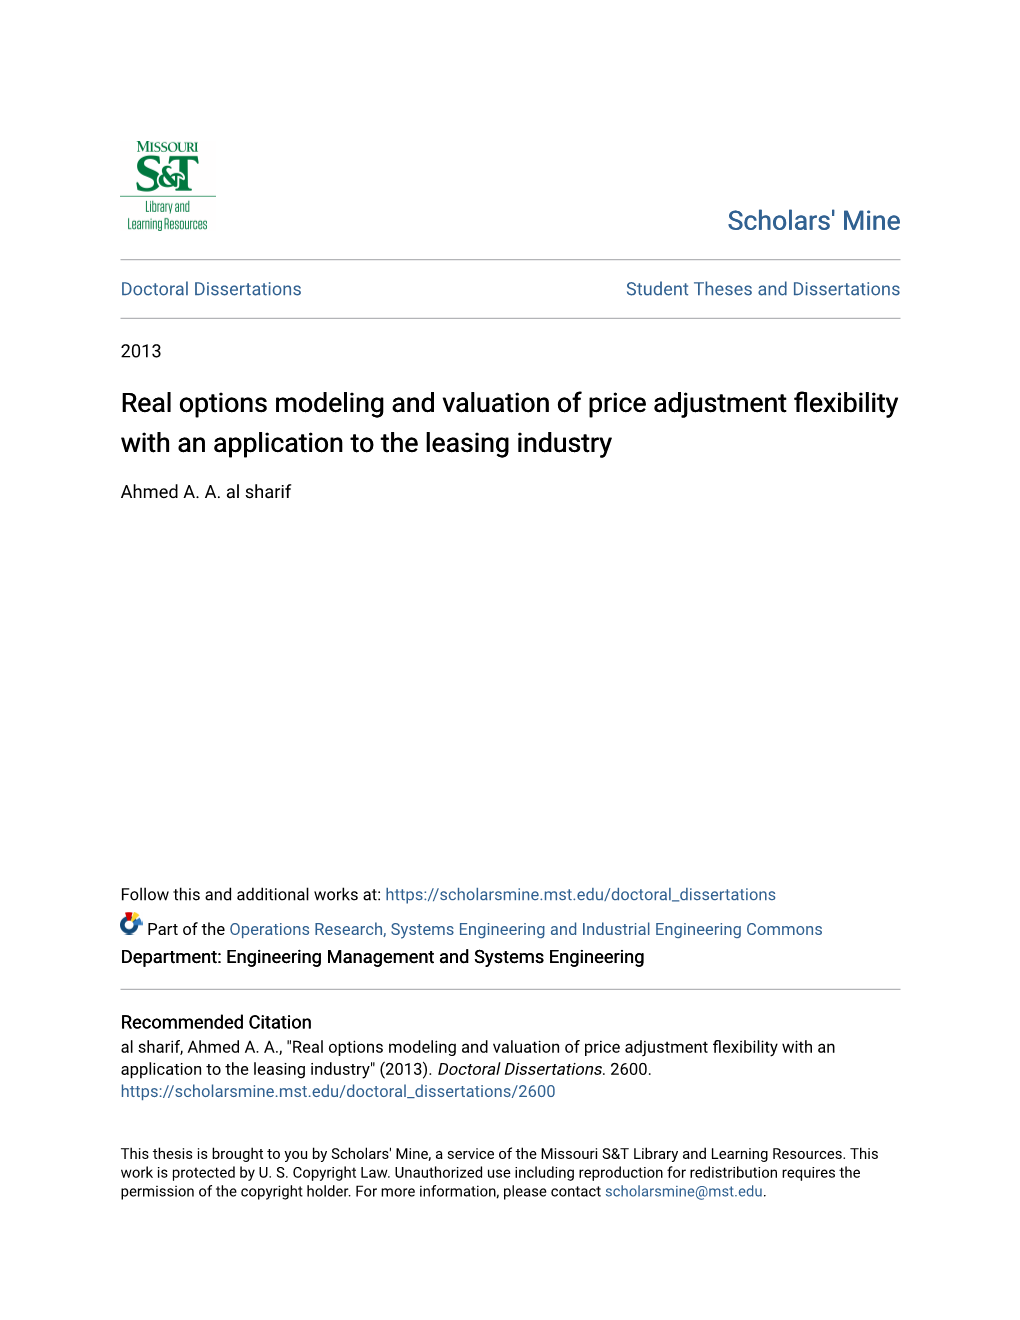 Real Options Modeling and Valuation of Price Adjustment Flexibility with an Application to the Leasing Industry